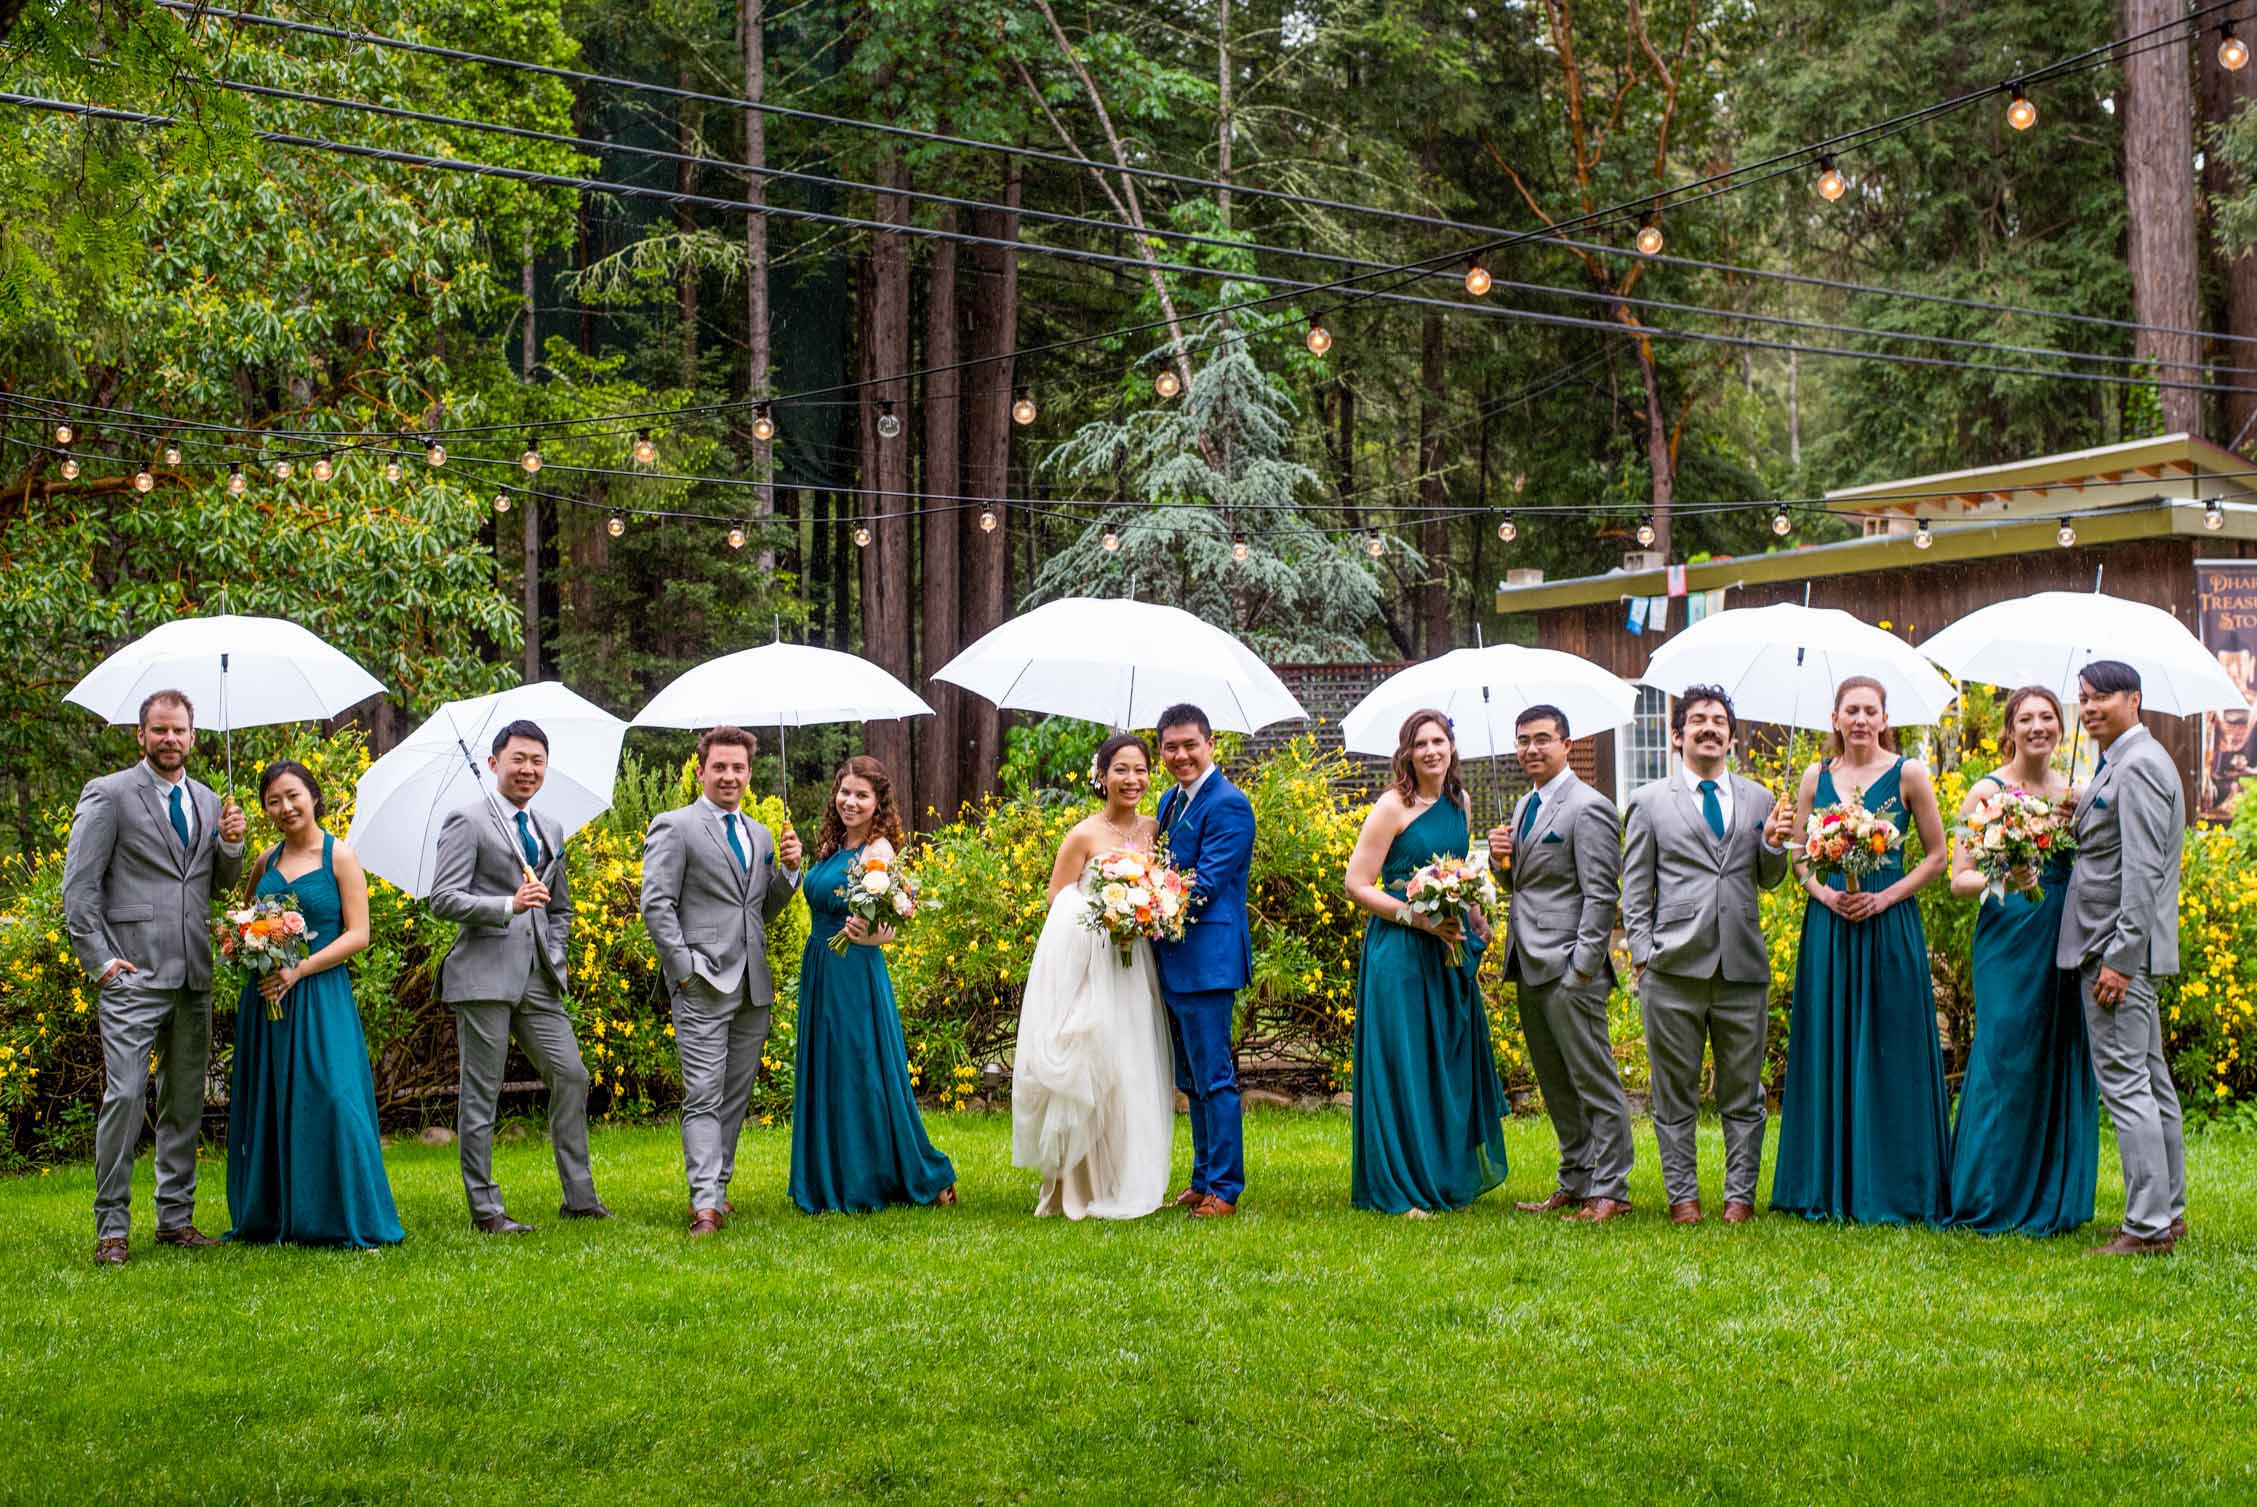 Large wedding party in teal and gray on redwoods lawn with string lights